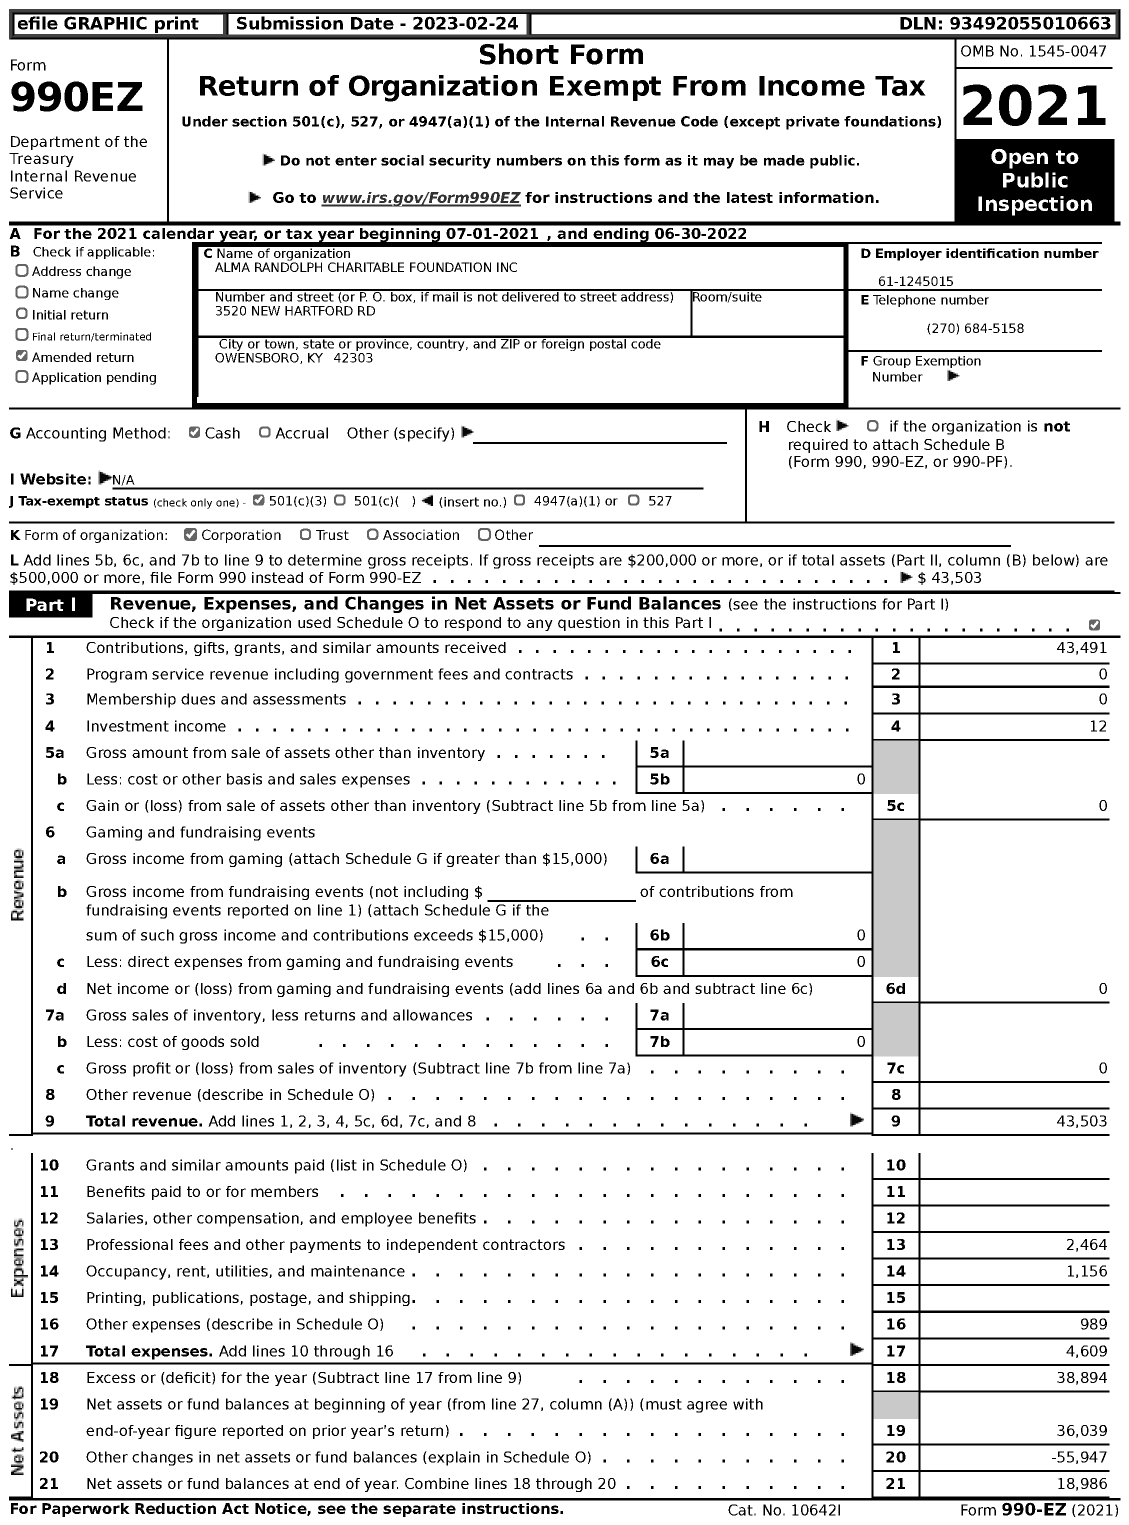 Image of first page of 2021 Form 990EZ for Alma Randolph Charitable Foundation